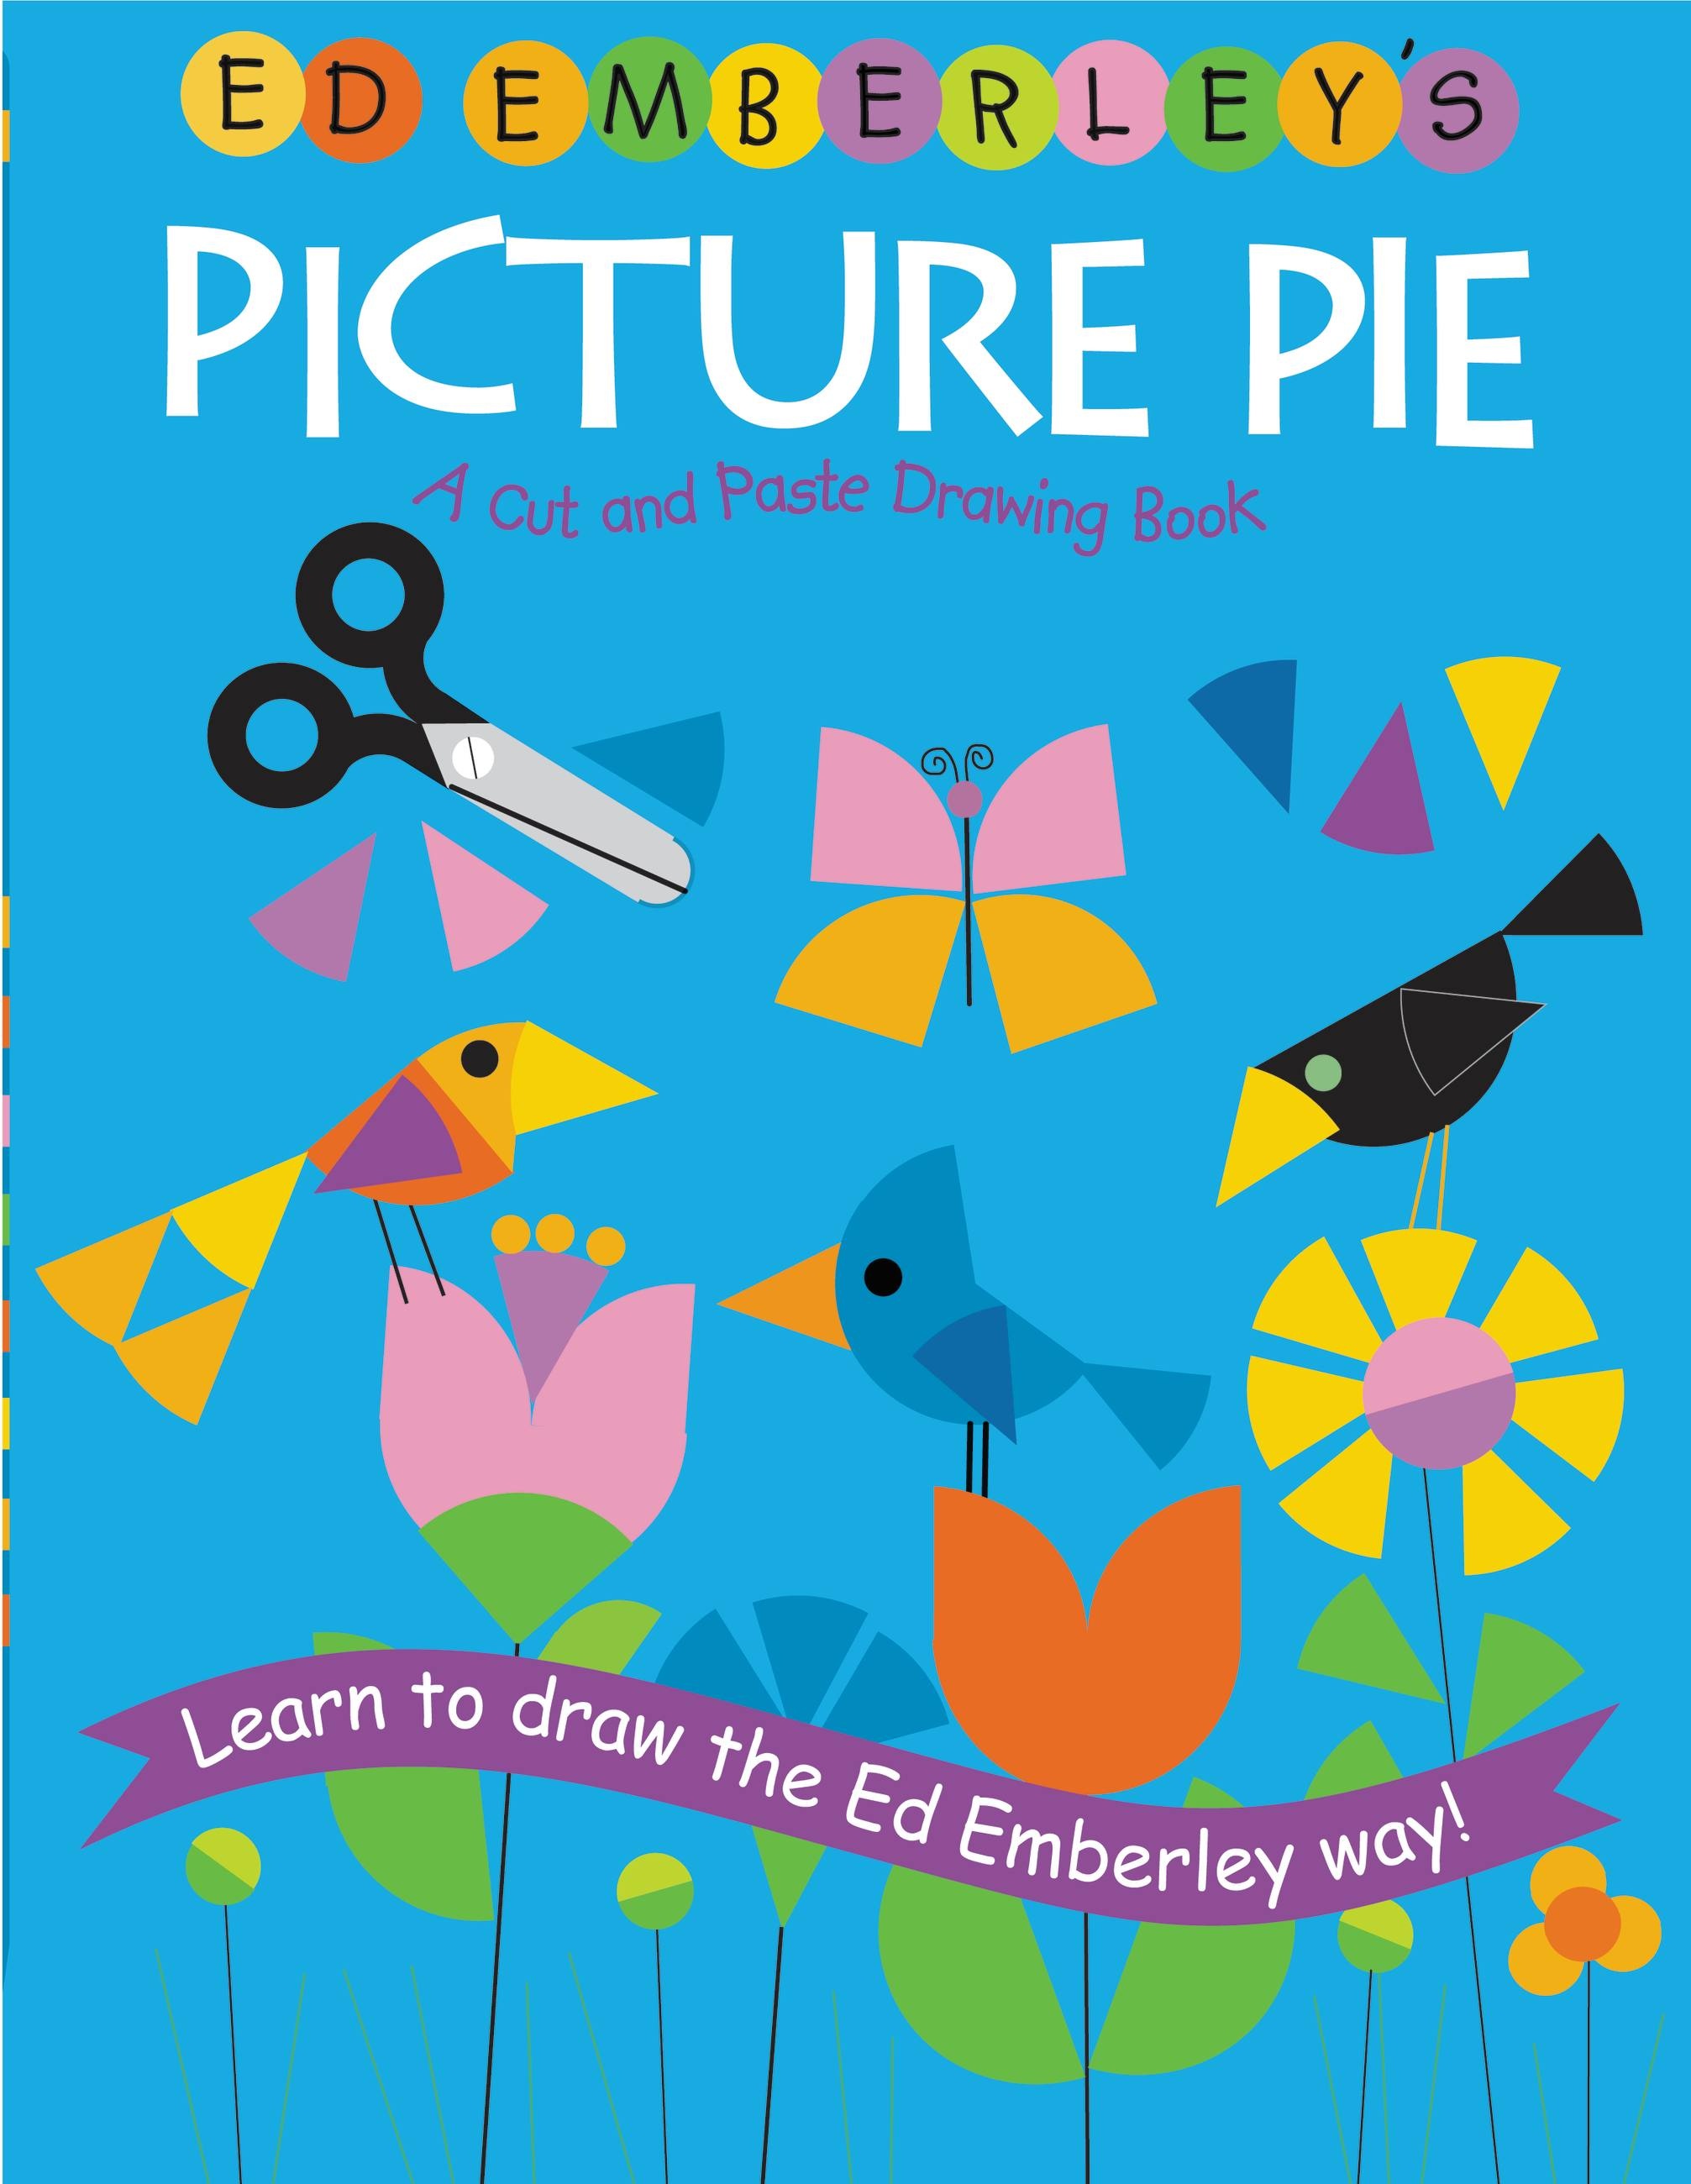 Ed Emberley's Picture Pie by Ed Emberley | Hachette Book Group